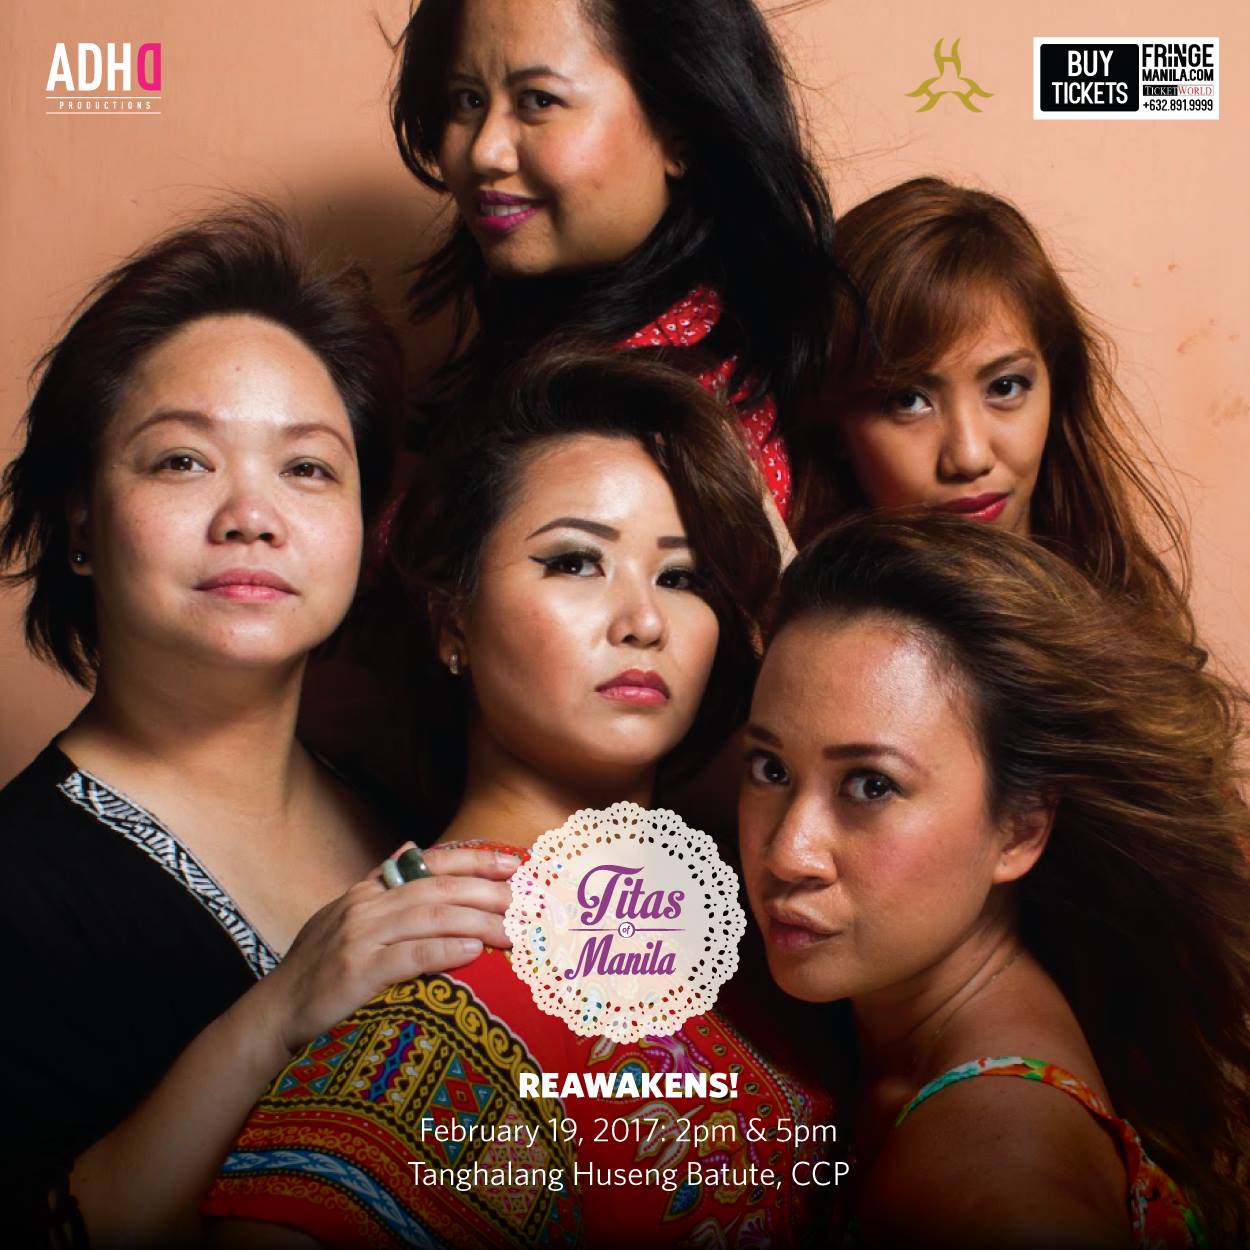 ADHD Productions Page Liked · January 19 · Your favorite Titas are back! TITAS OF MANILA: REAWAKENS! February 19: 2pm & 5pm Tanghalang Huseng Batute, Cultural Center of the Philippines Ticket prices: Regular P400 Student P350 Tickets are available at Ticketworld and CCP Box Office. For reservations, contact: 0917-563-4470 #FringeMNL #ADHDproductions #HowTitaAreYou